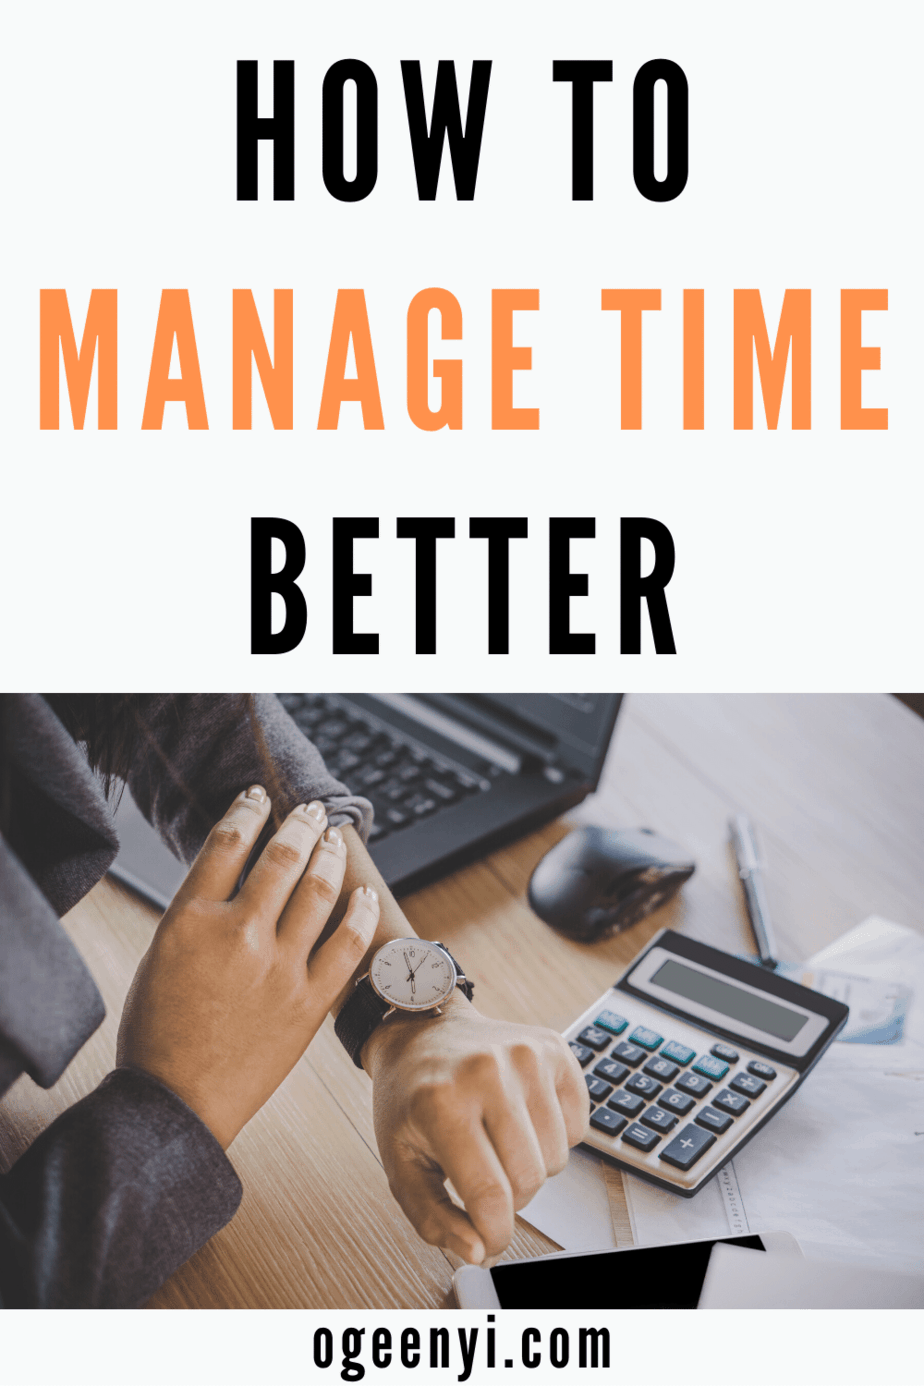 How To Manage Time - 10 Powerful Time Management Skills